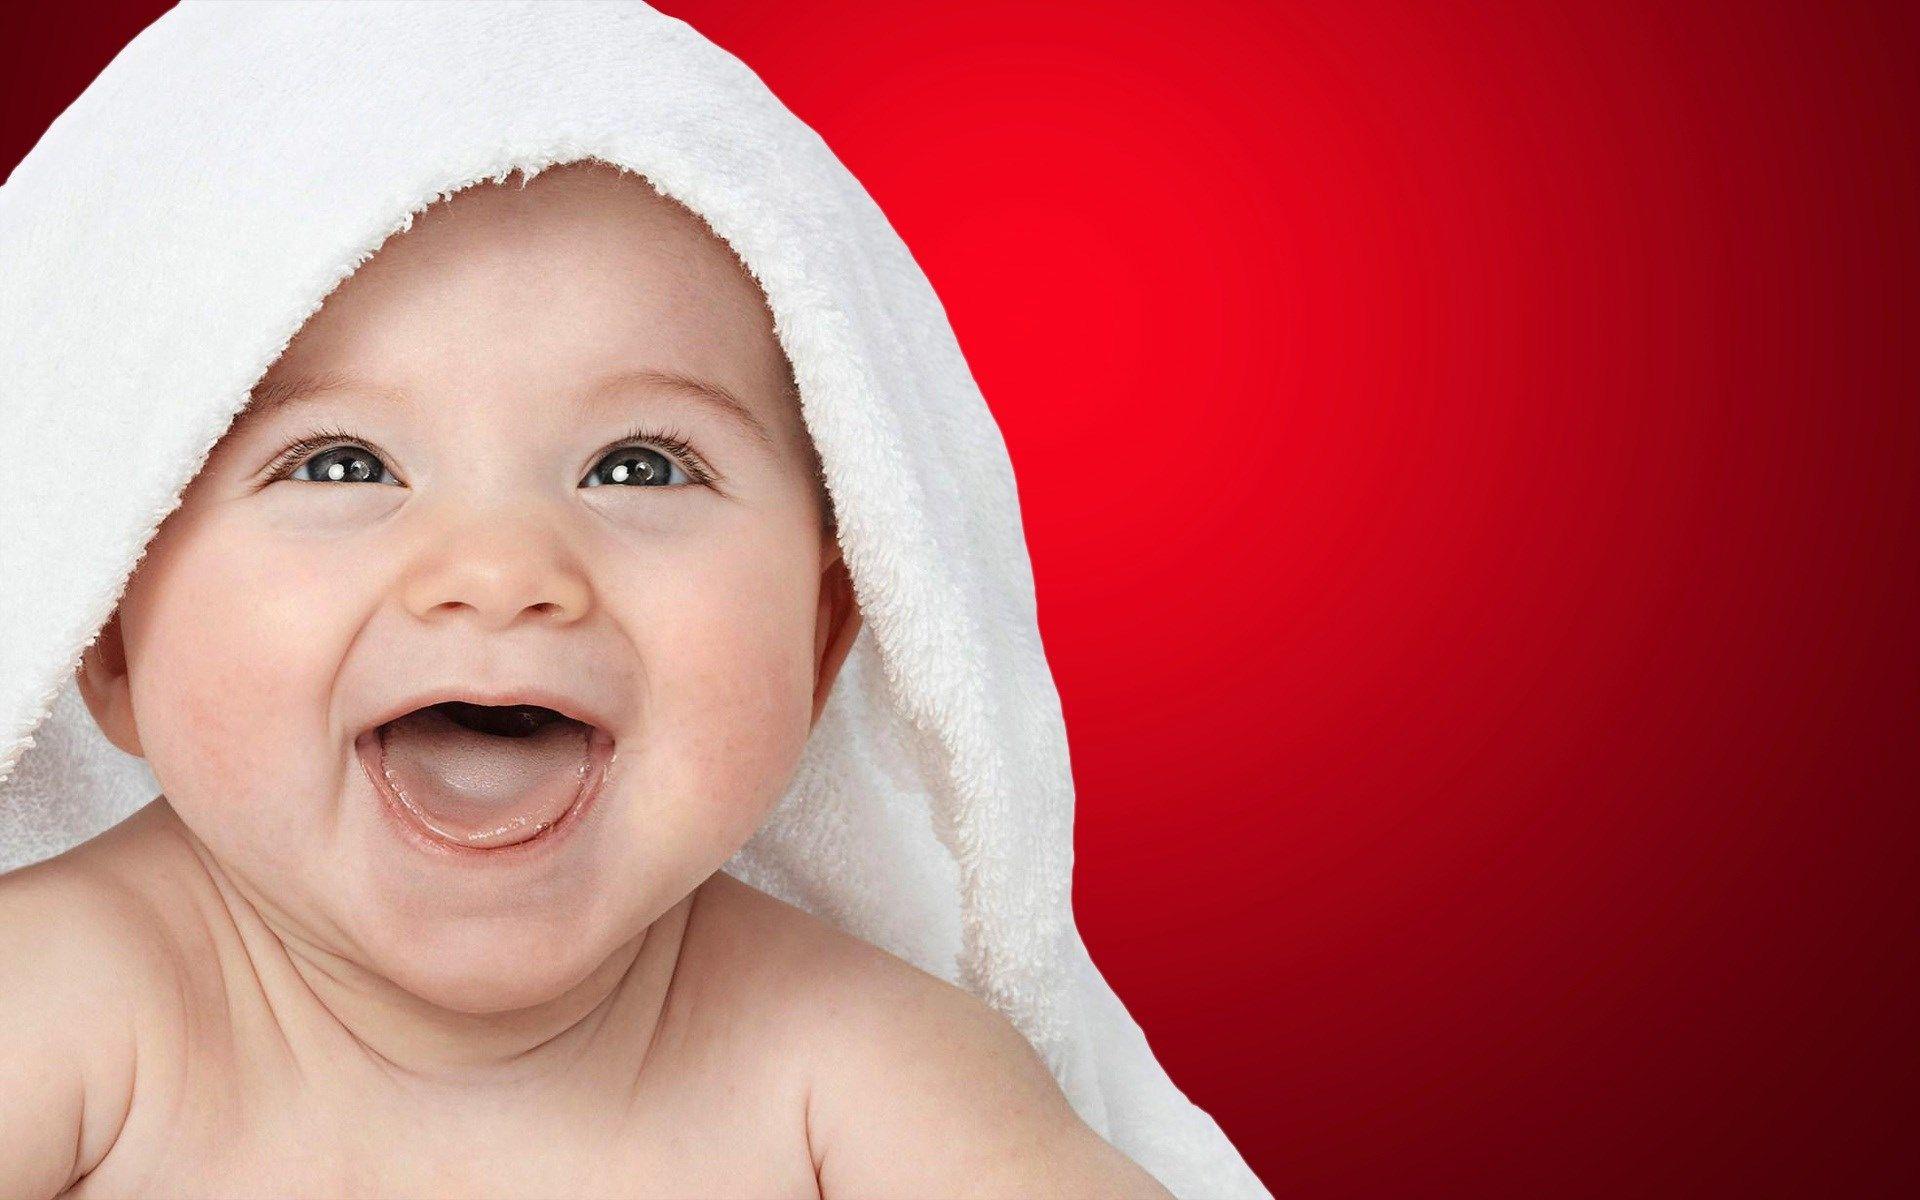 Baby Smile Wallpapers Top Free Baby Smile Backgrounds Wallpaperaccess